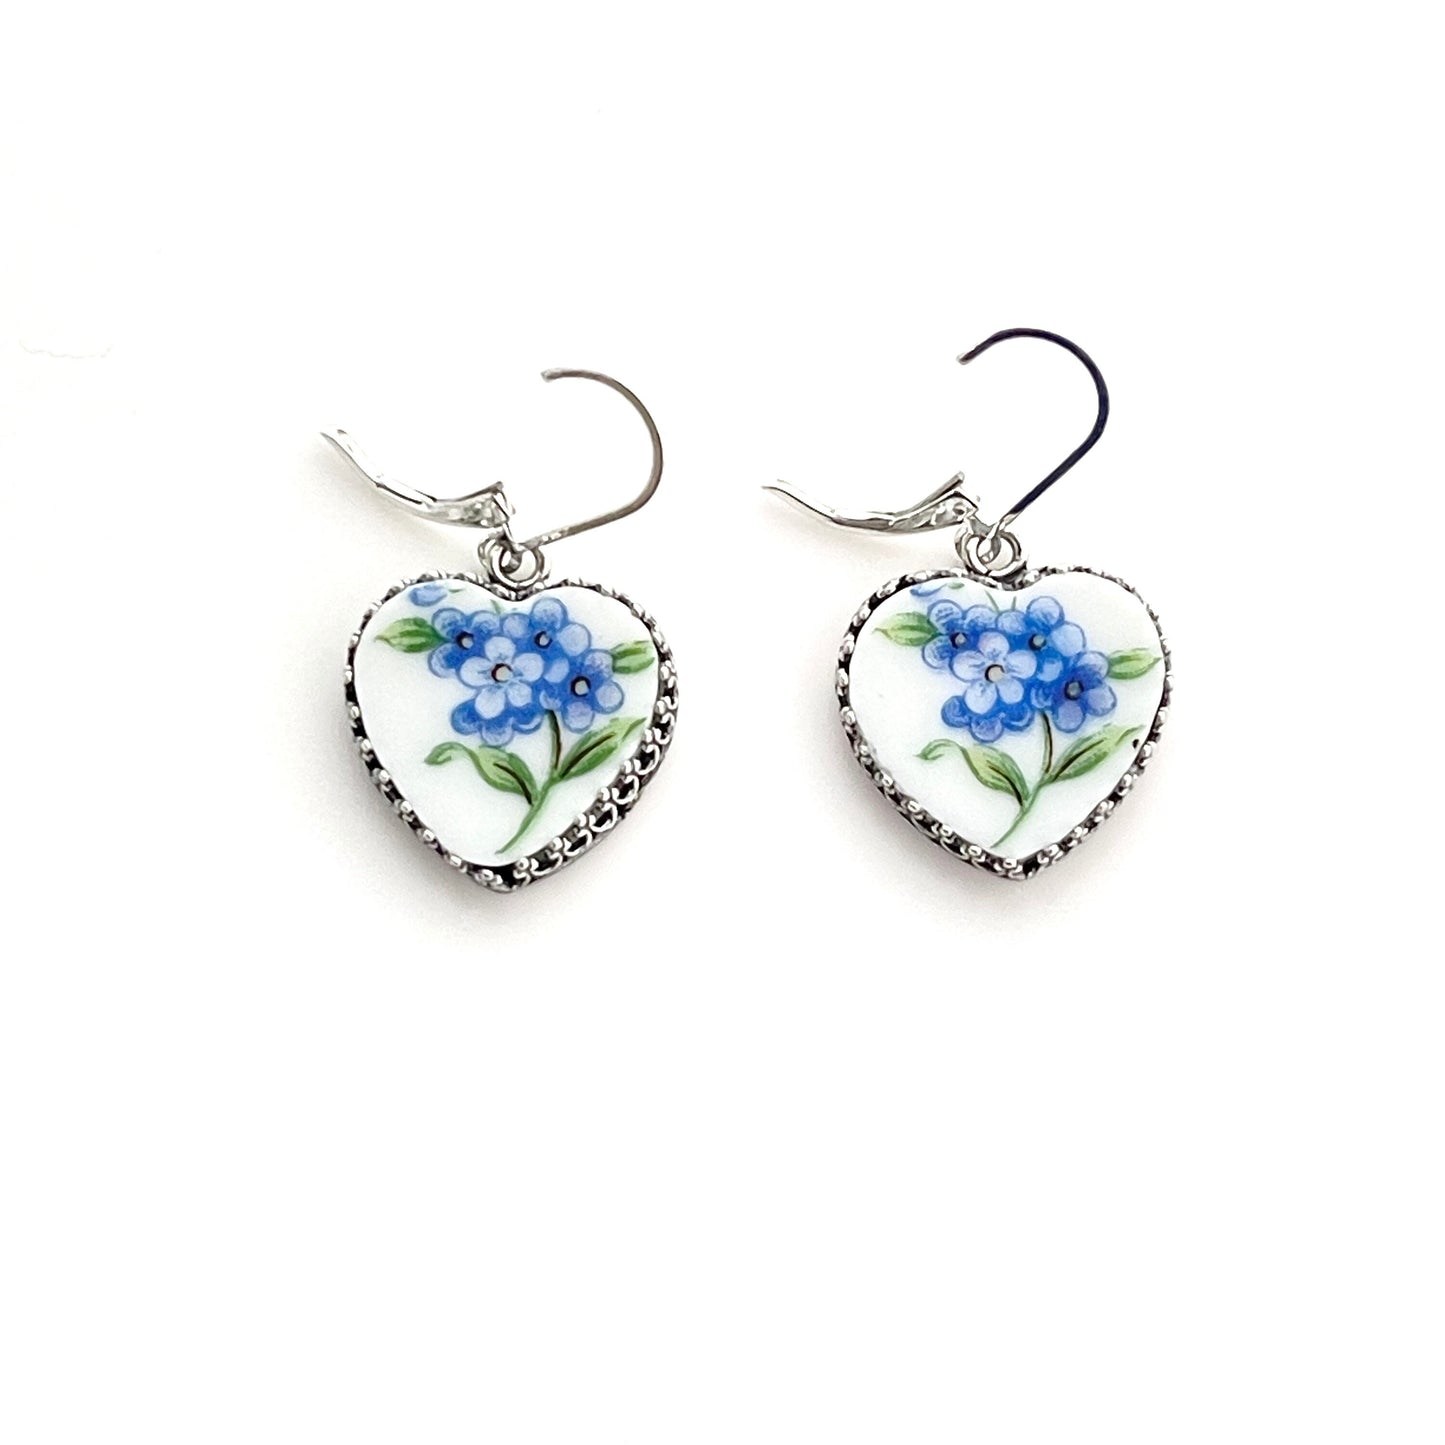 Forget Me Not China Earrings, 20th Anniversary Gift for Wife,  Blue Broken China Jewelry, Heart Forget Me Not Earrings, Jewelry Gifts